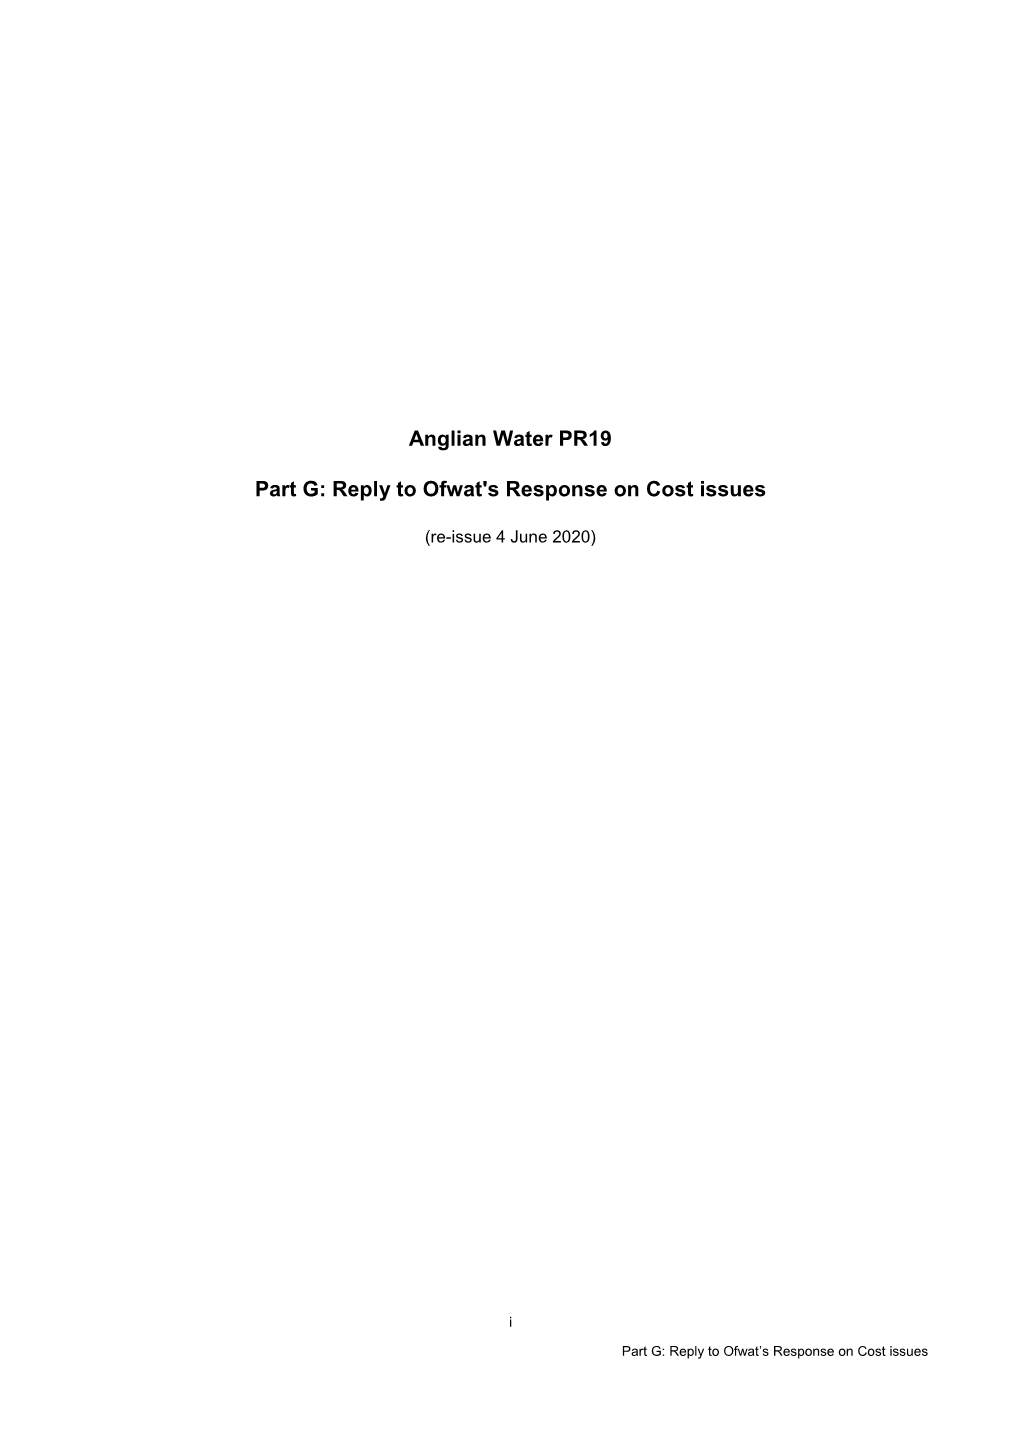 Anglian Water PR19 Part G: Reply to Ofwat's Response on Cost Issues